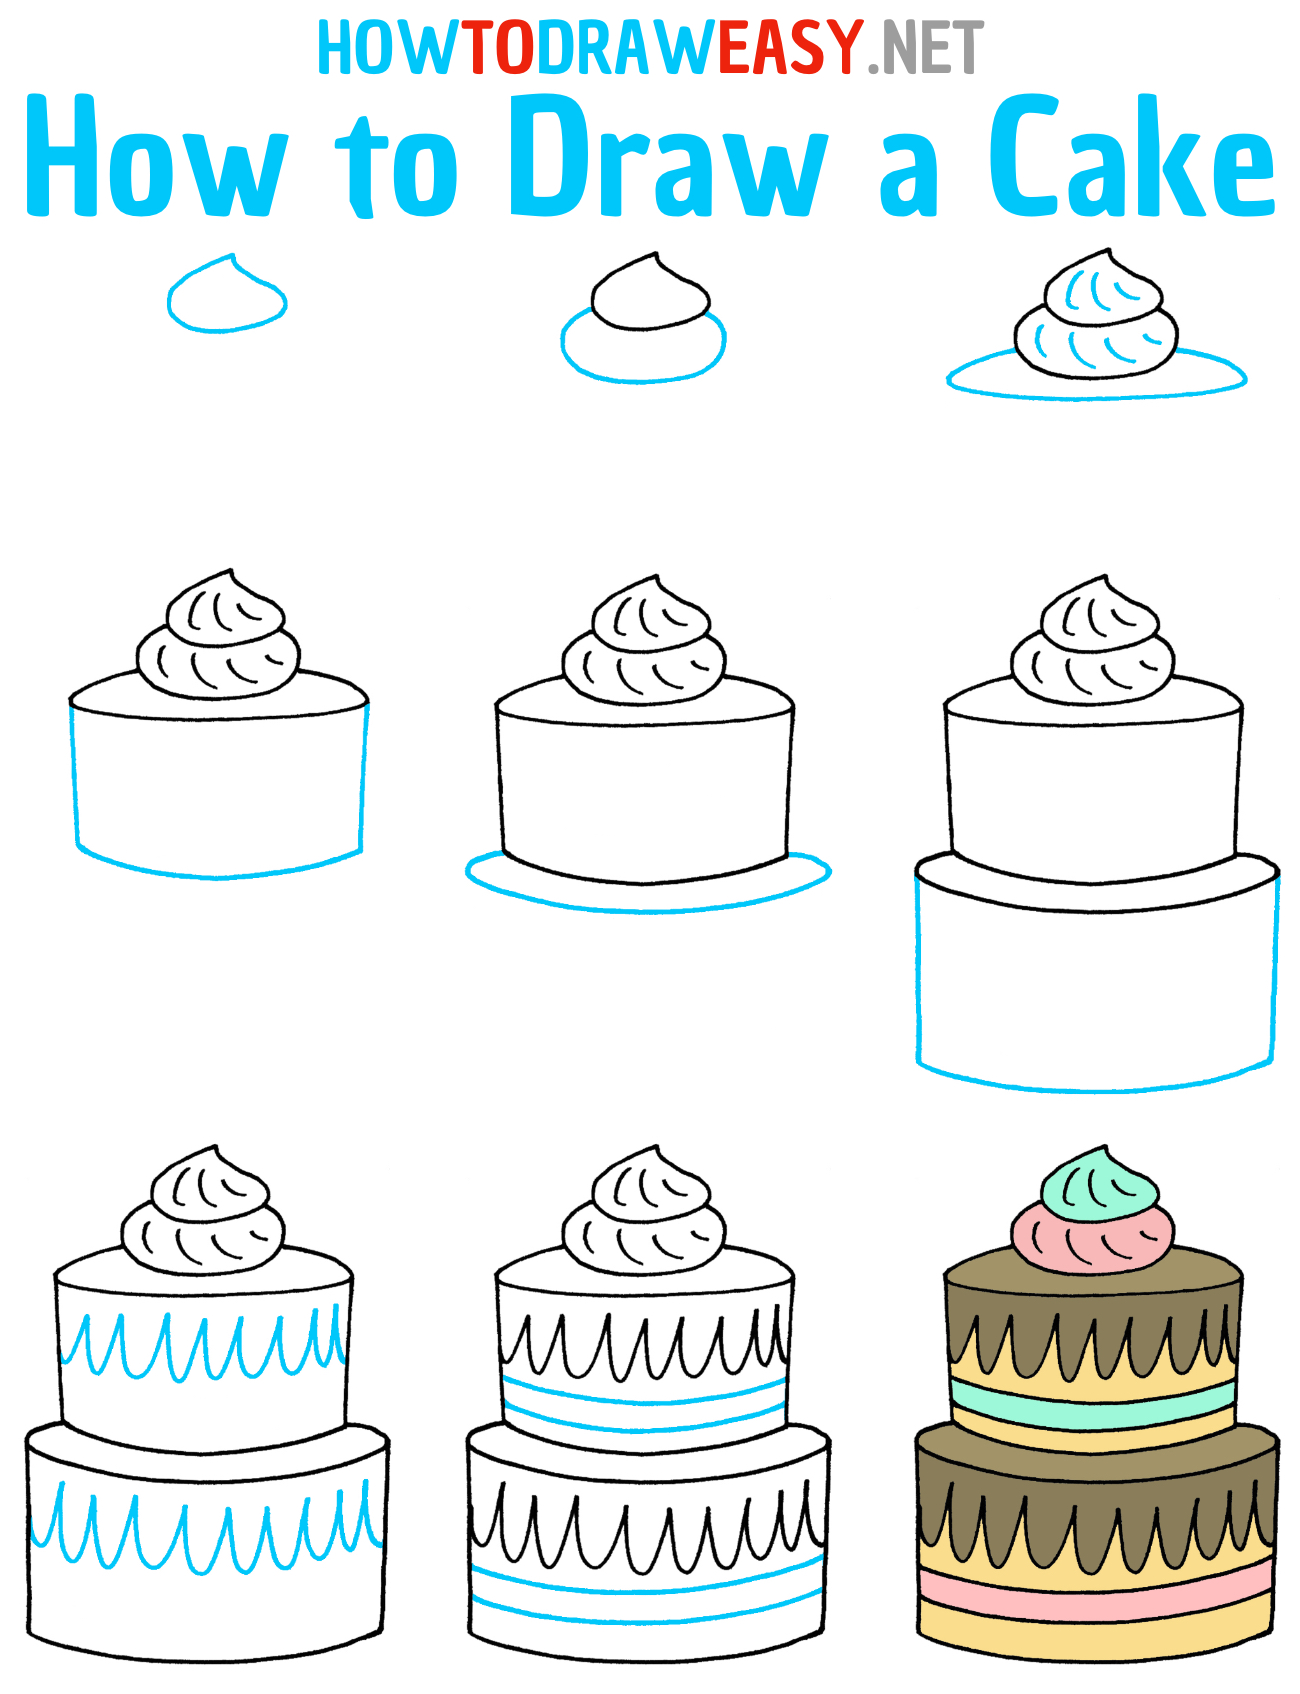 How to Draw a Cake Step by Step